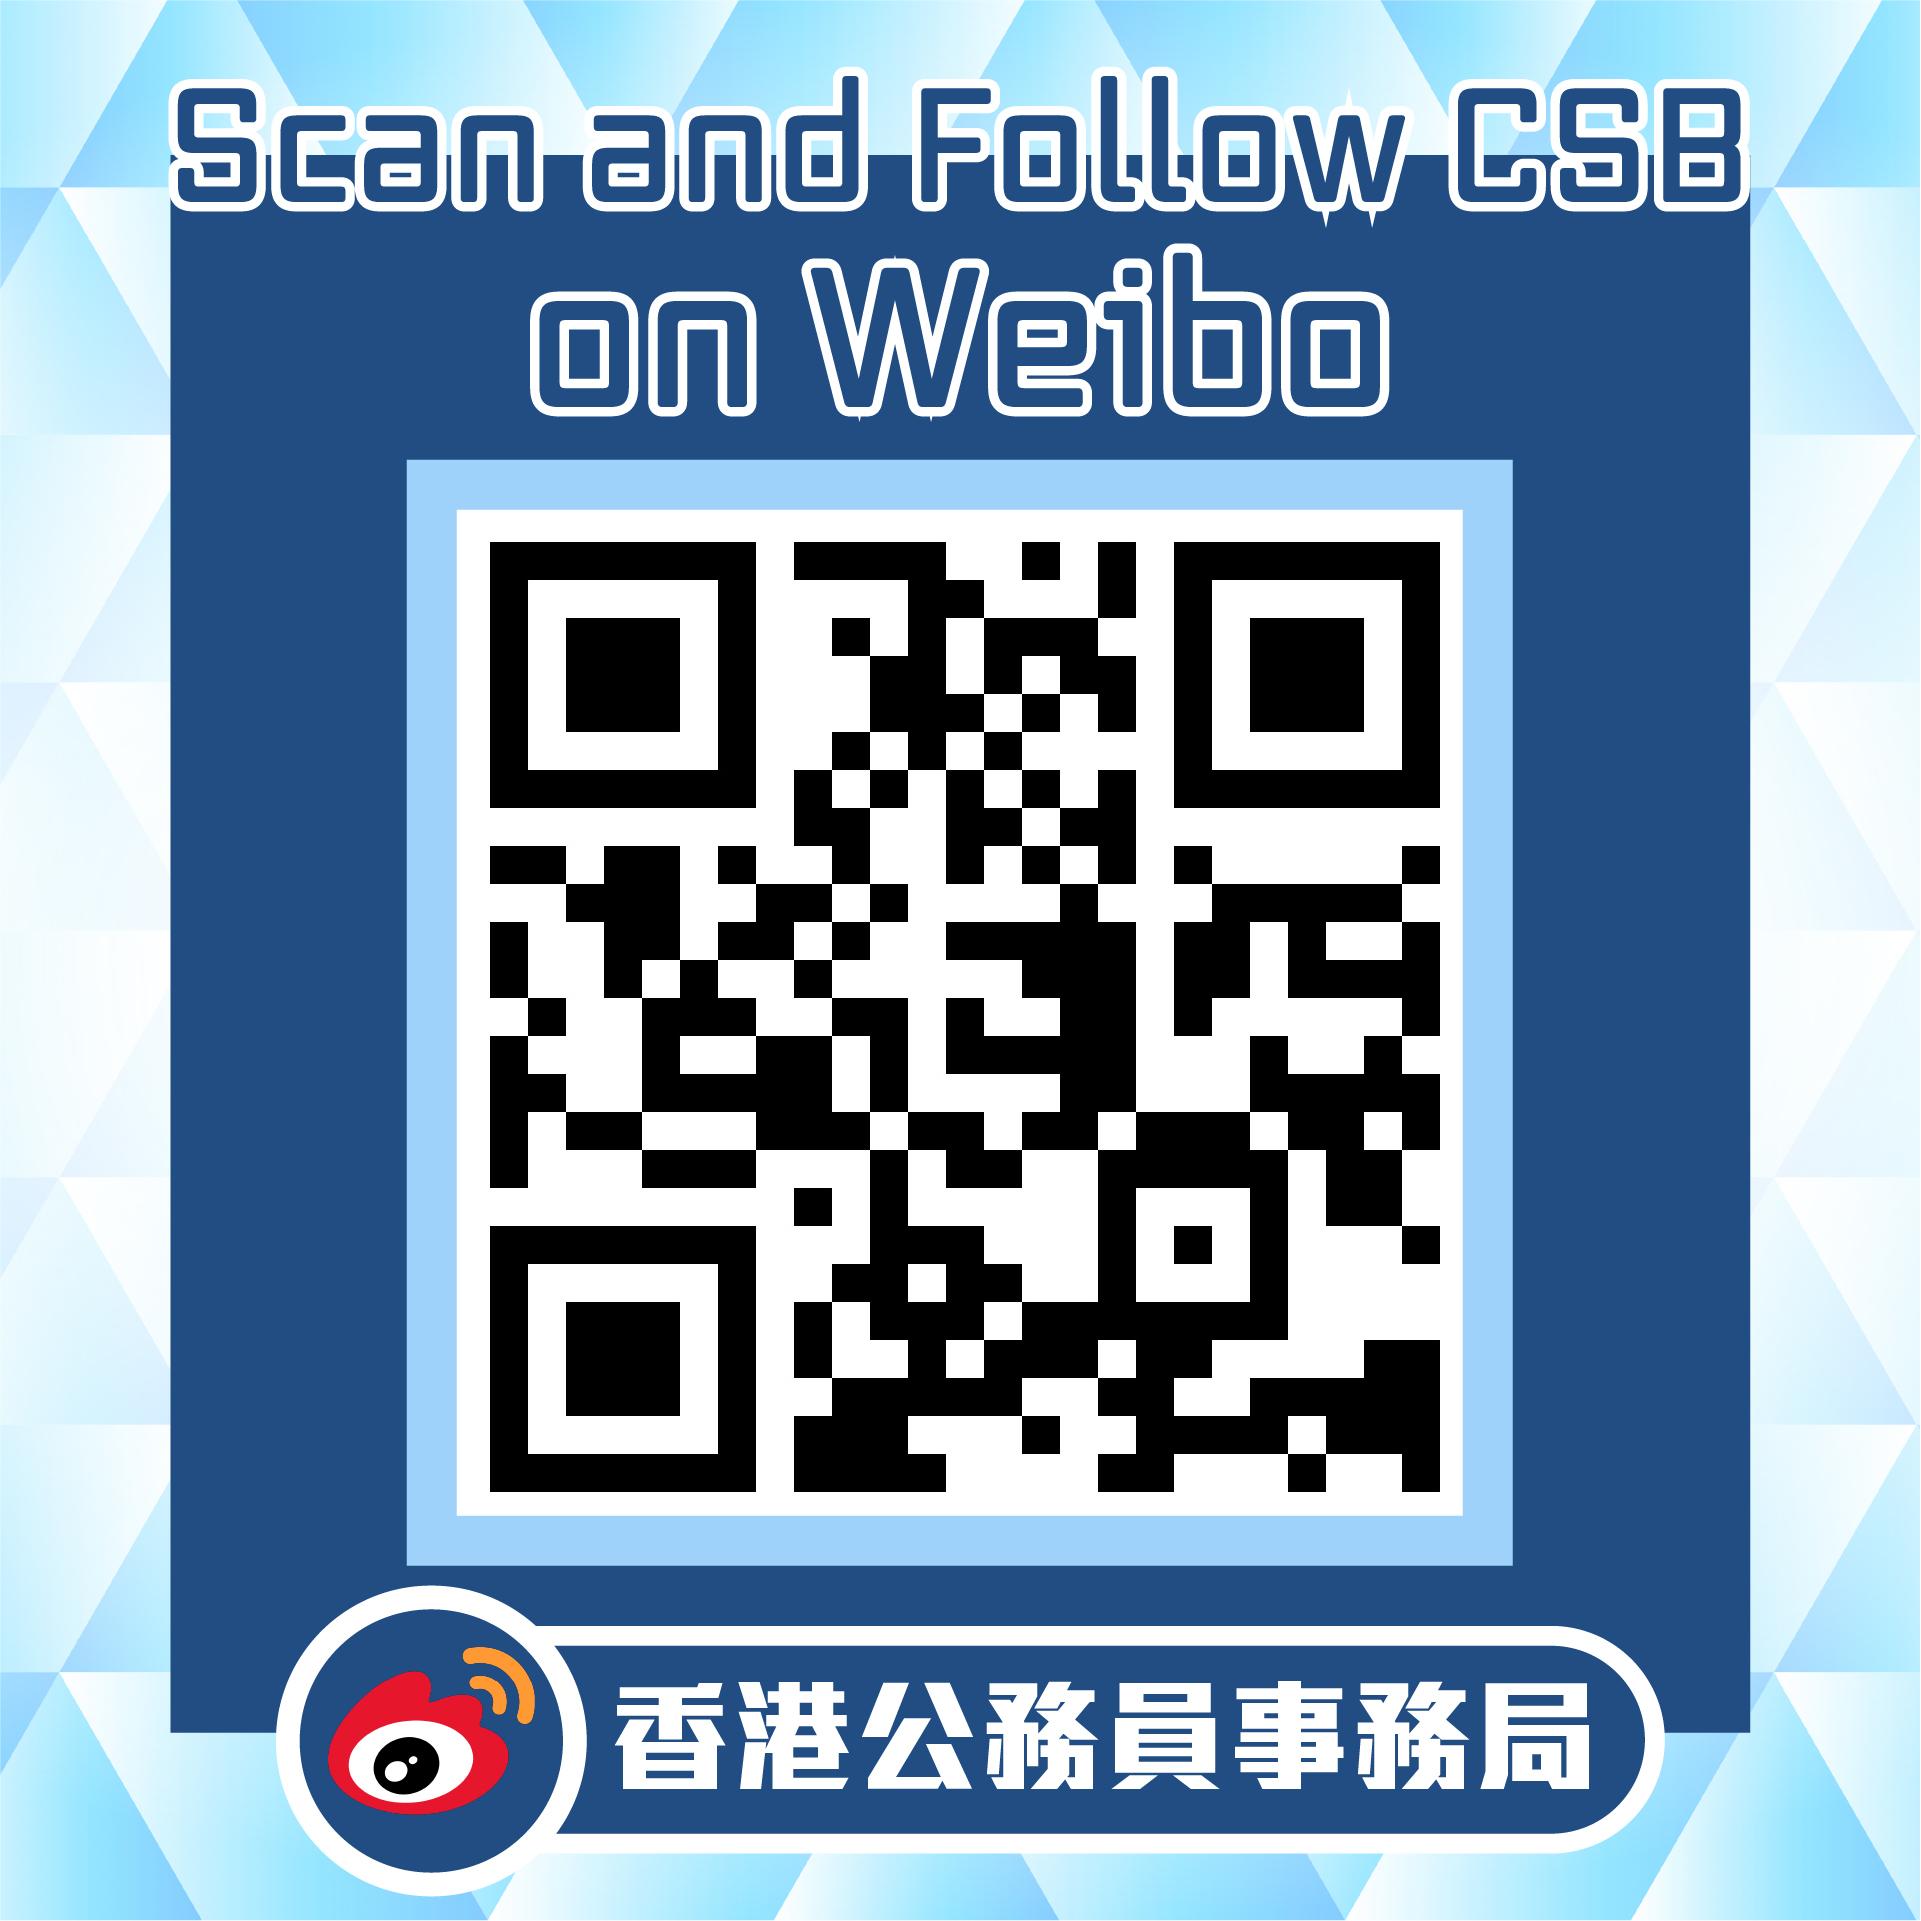 The Civil Service Bureau (CSB) launched its official Weibo account today (October 1). Picture shows the QR code of the CSB's official Weibo account.